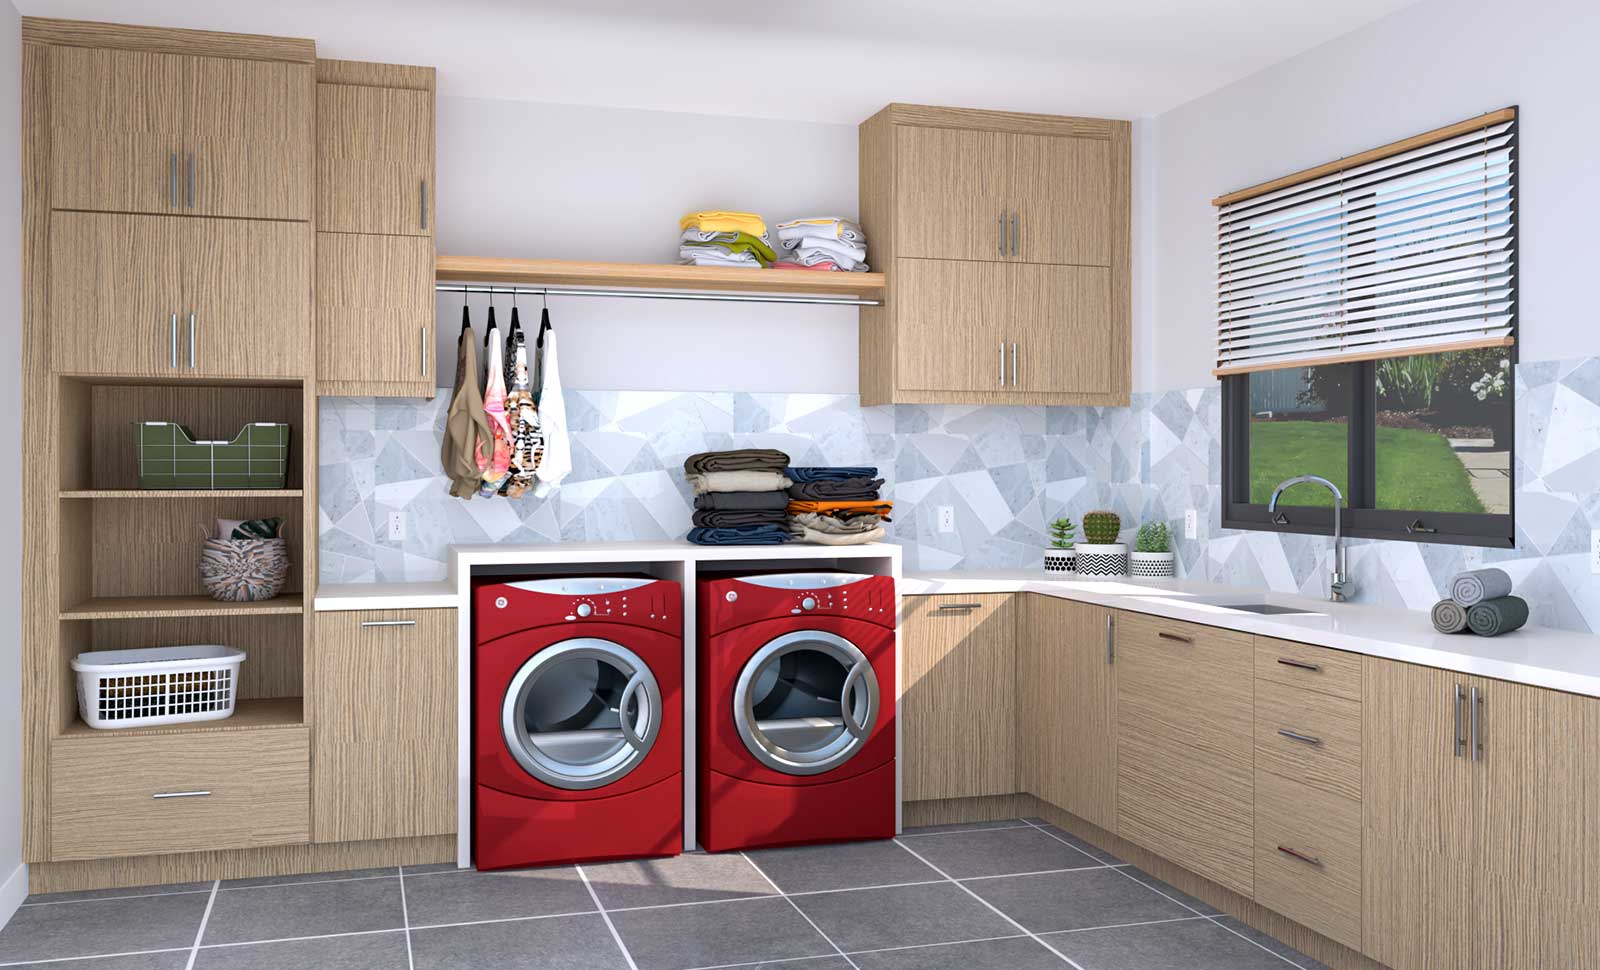 https://inspiredkitchendesign.com/wp-content/uploads/2022/11/1-a-step-by-step-guide-to-a-beautiful-ikea-laundry-room.jpg